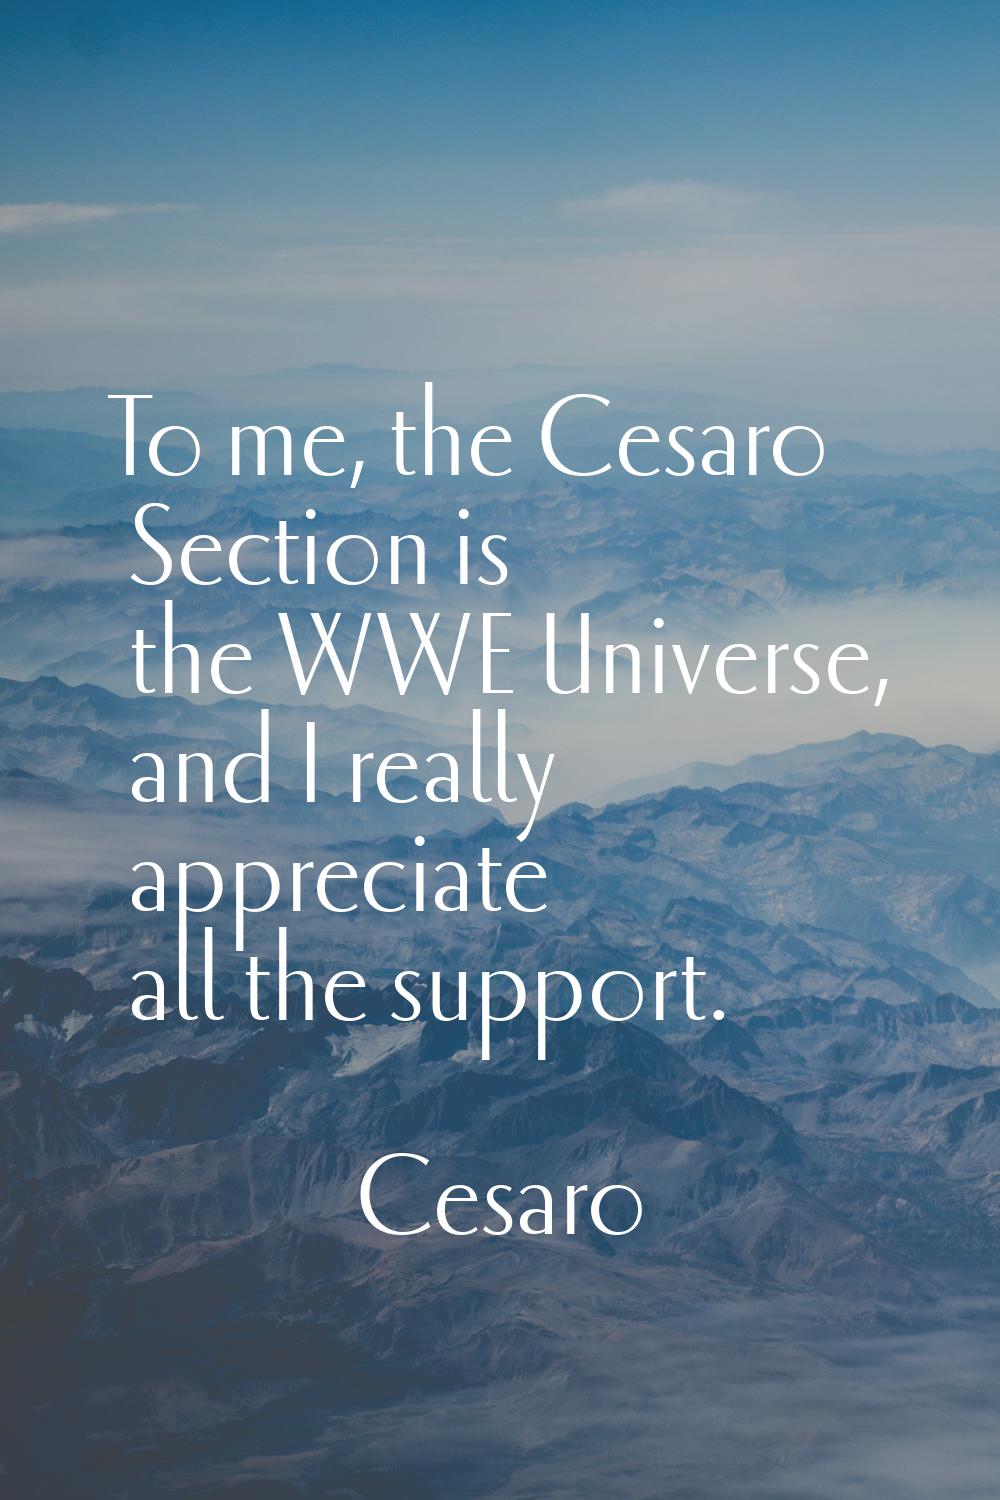 To me, the Cesaro Section is the WWE Universe, and I really appreciate all the support.